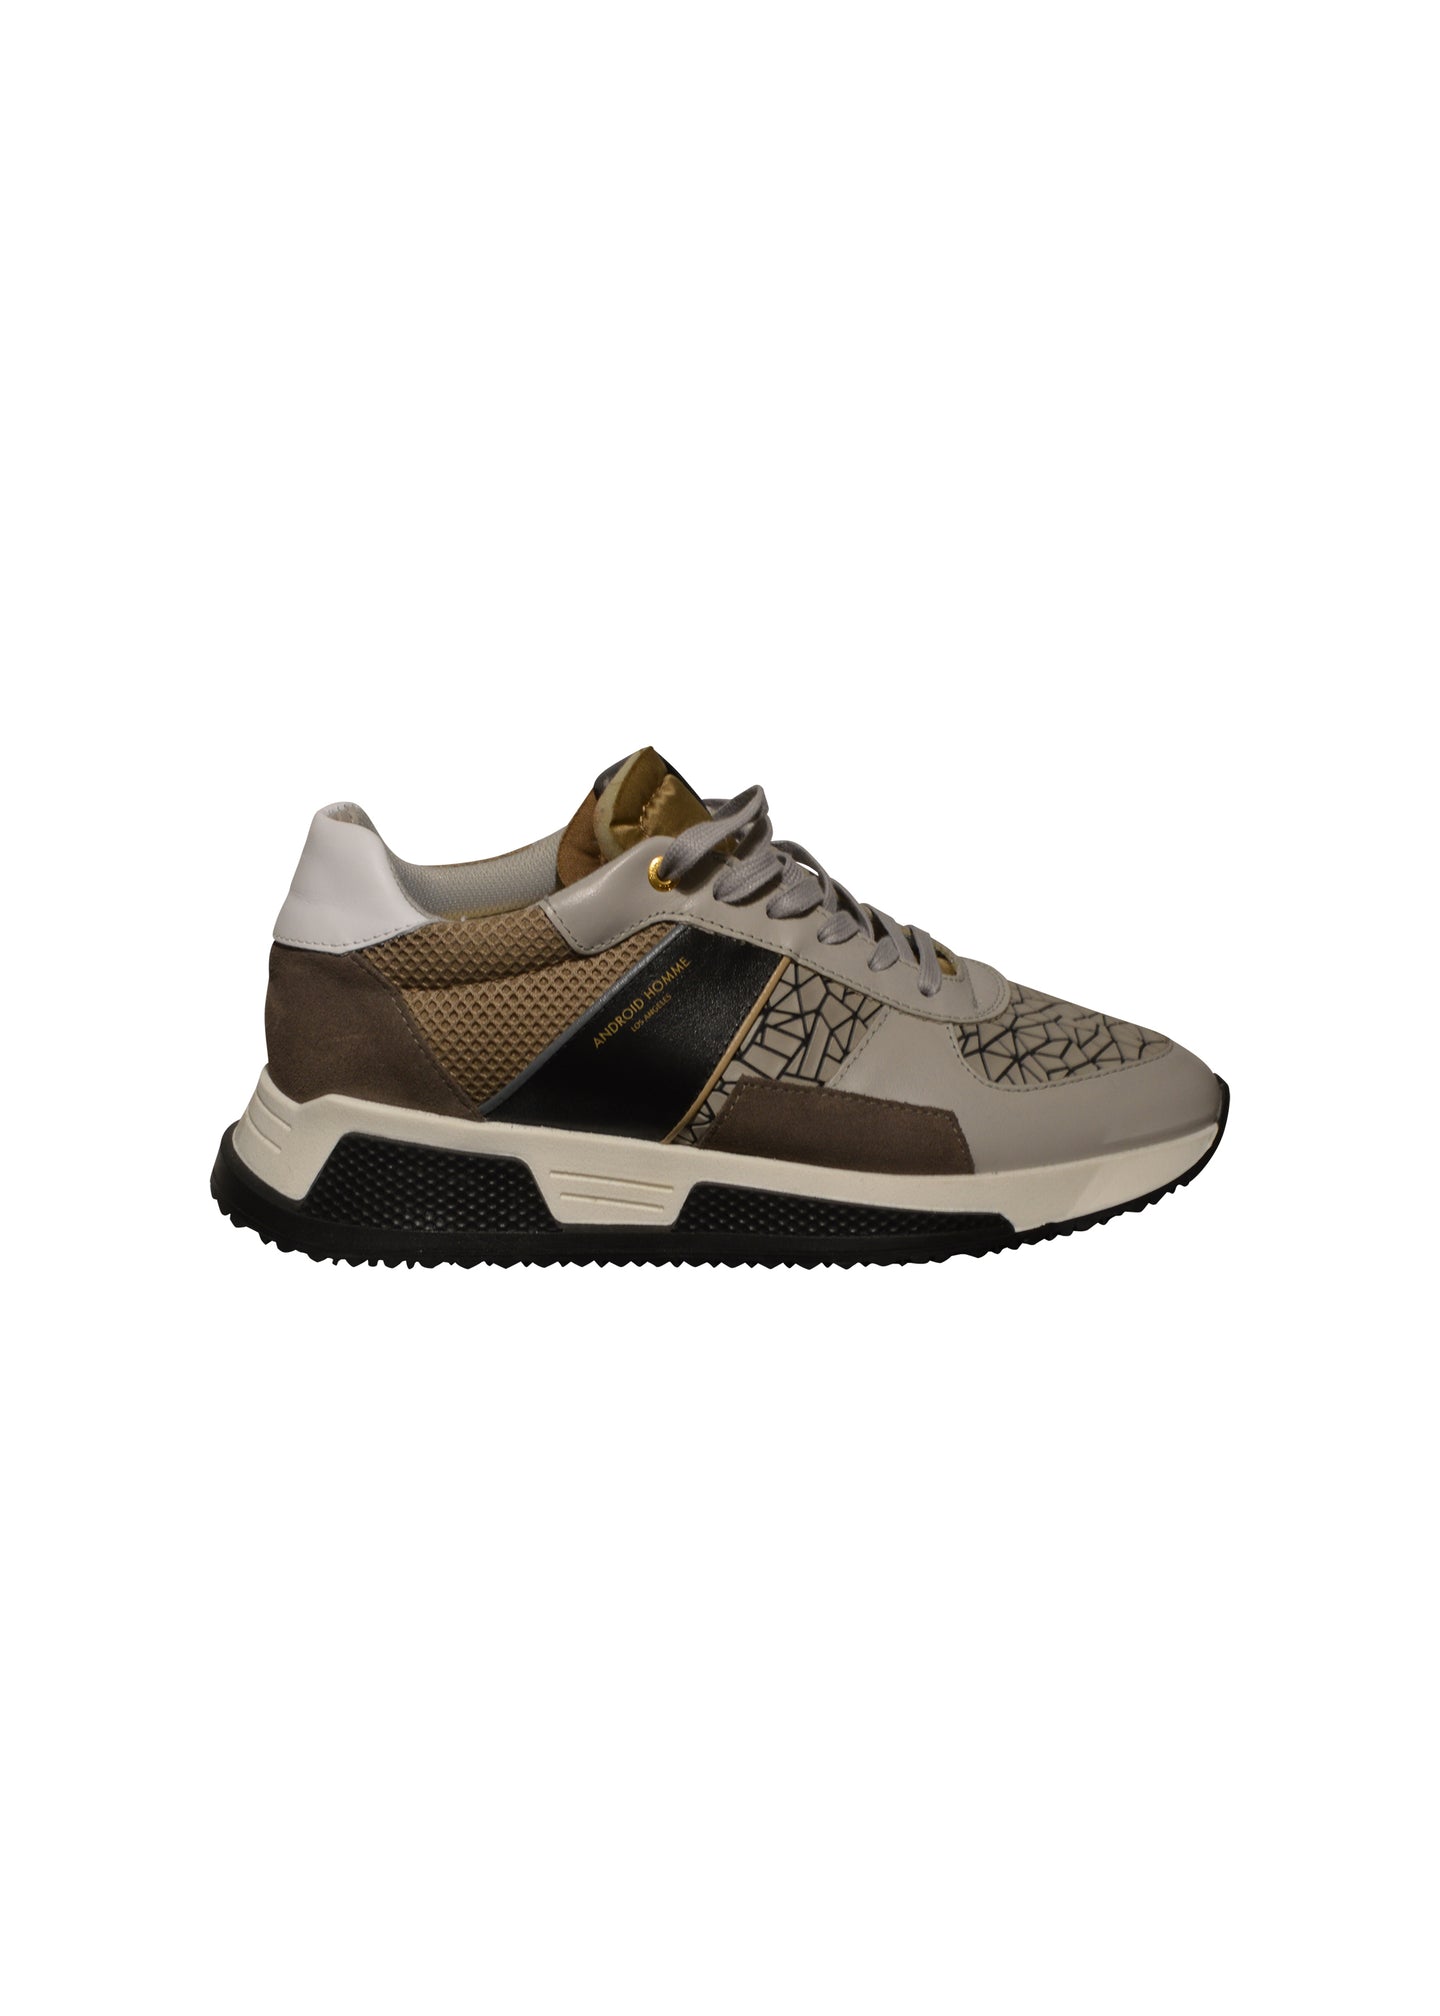 Android Homme - Mosaic Mix Runner - 300451 - Grey Black